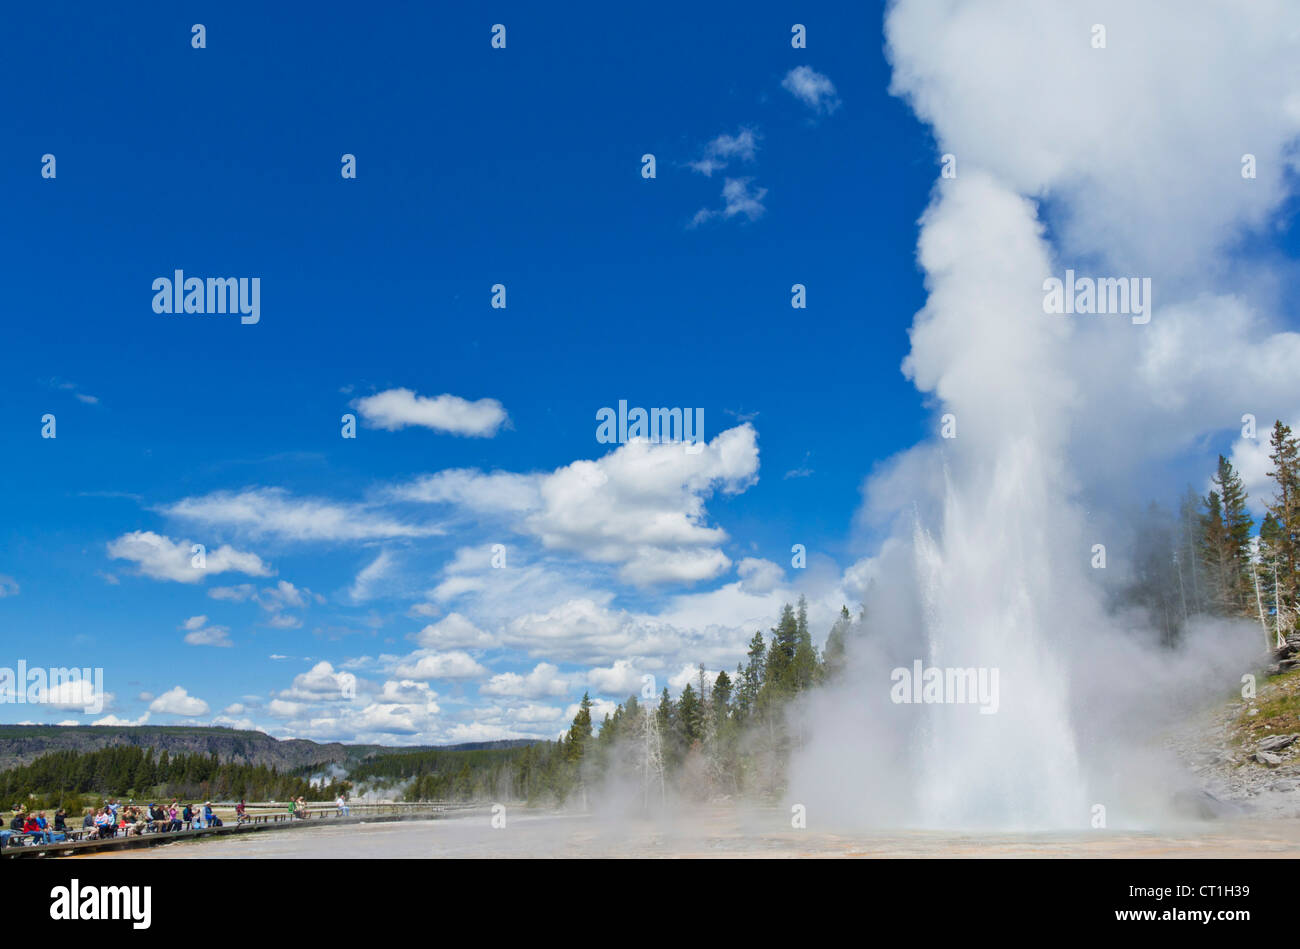 people watching the eruption of grand geyser upper geyser basin yellowstone national park wyoming usa united states of america Stock Photo